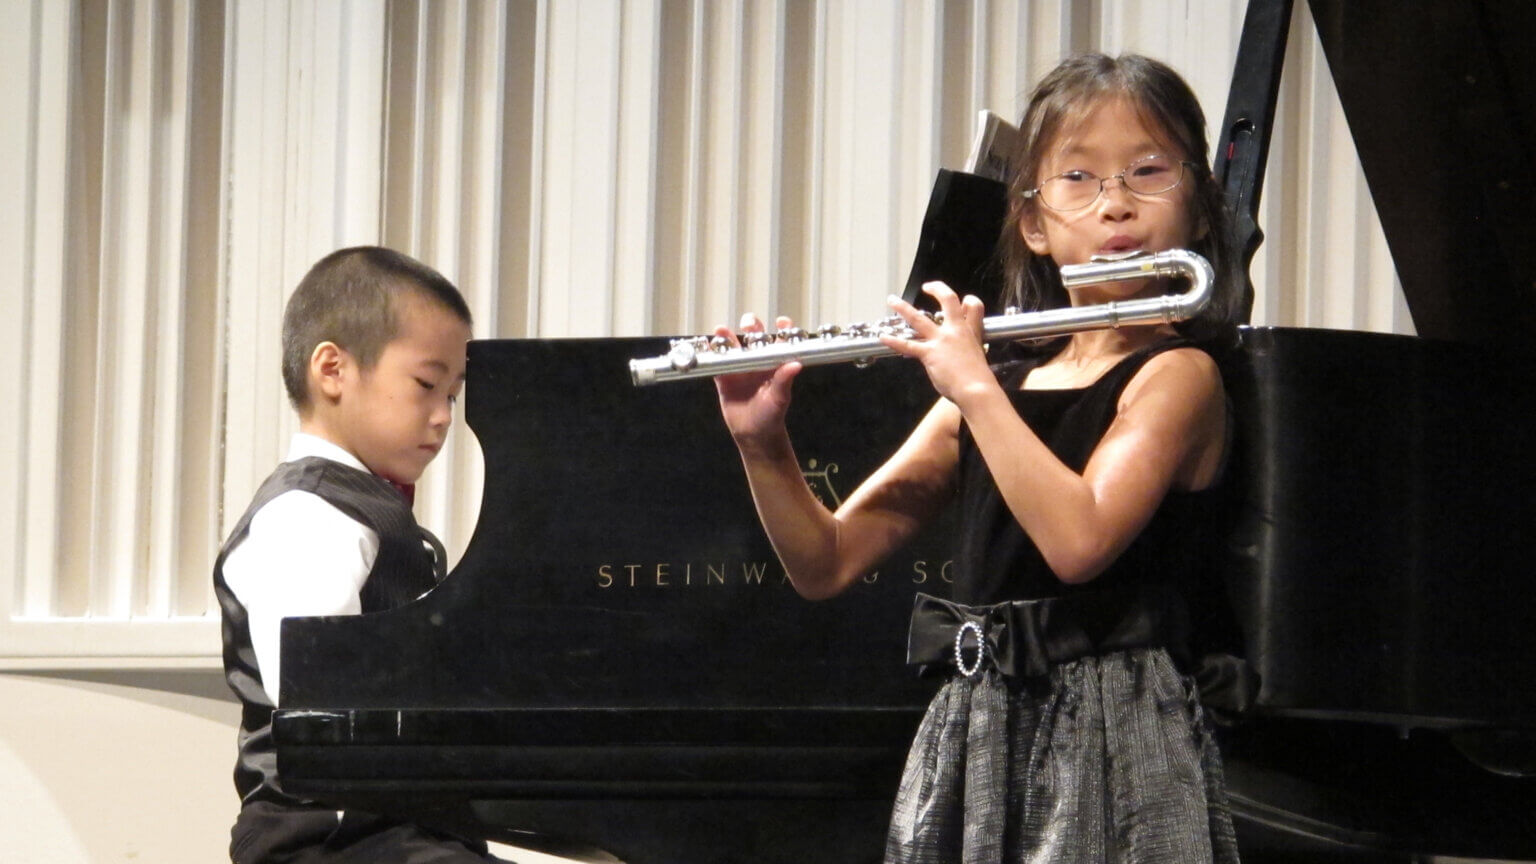 Music & Dance Academy | Music Lessons, Violin Lessons, Piano Lessons, Voice Lessons